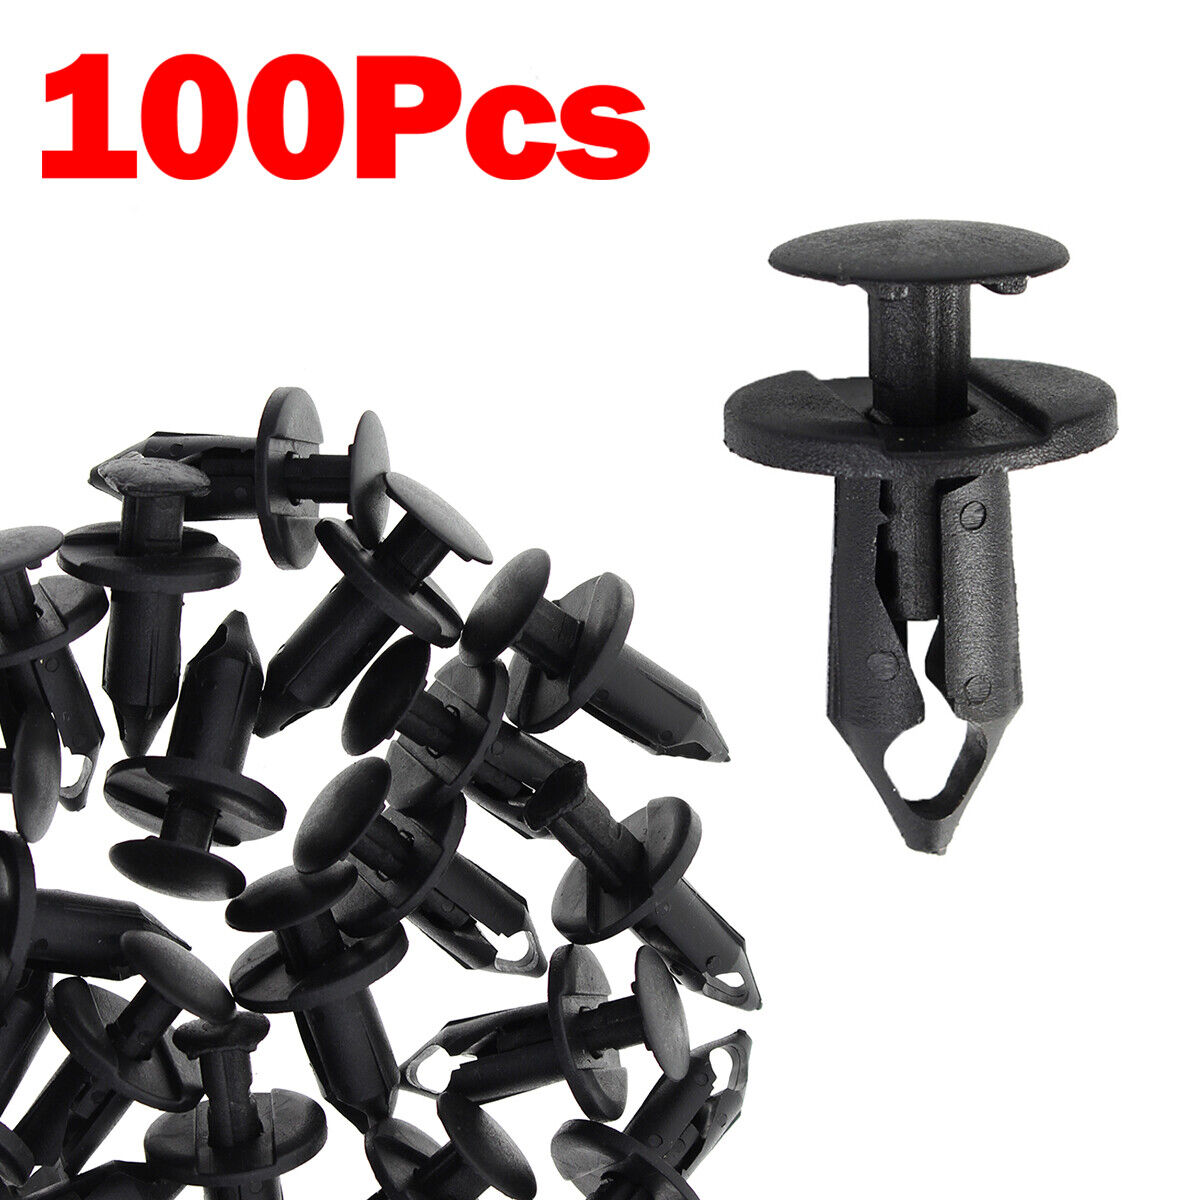 100pc Clips for Hole Plastic Rivets Retainer Fender Bumper Push Pin Fastener 8mm